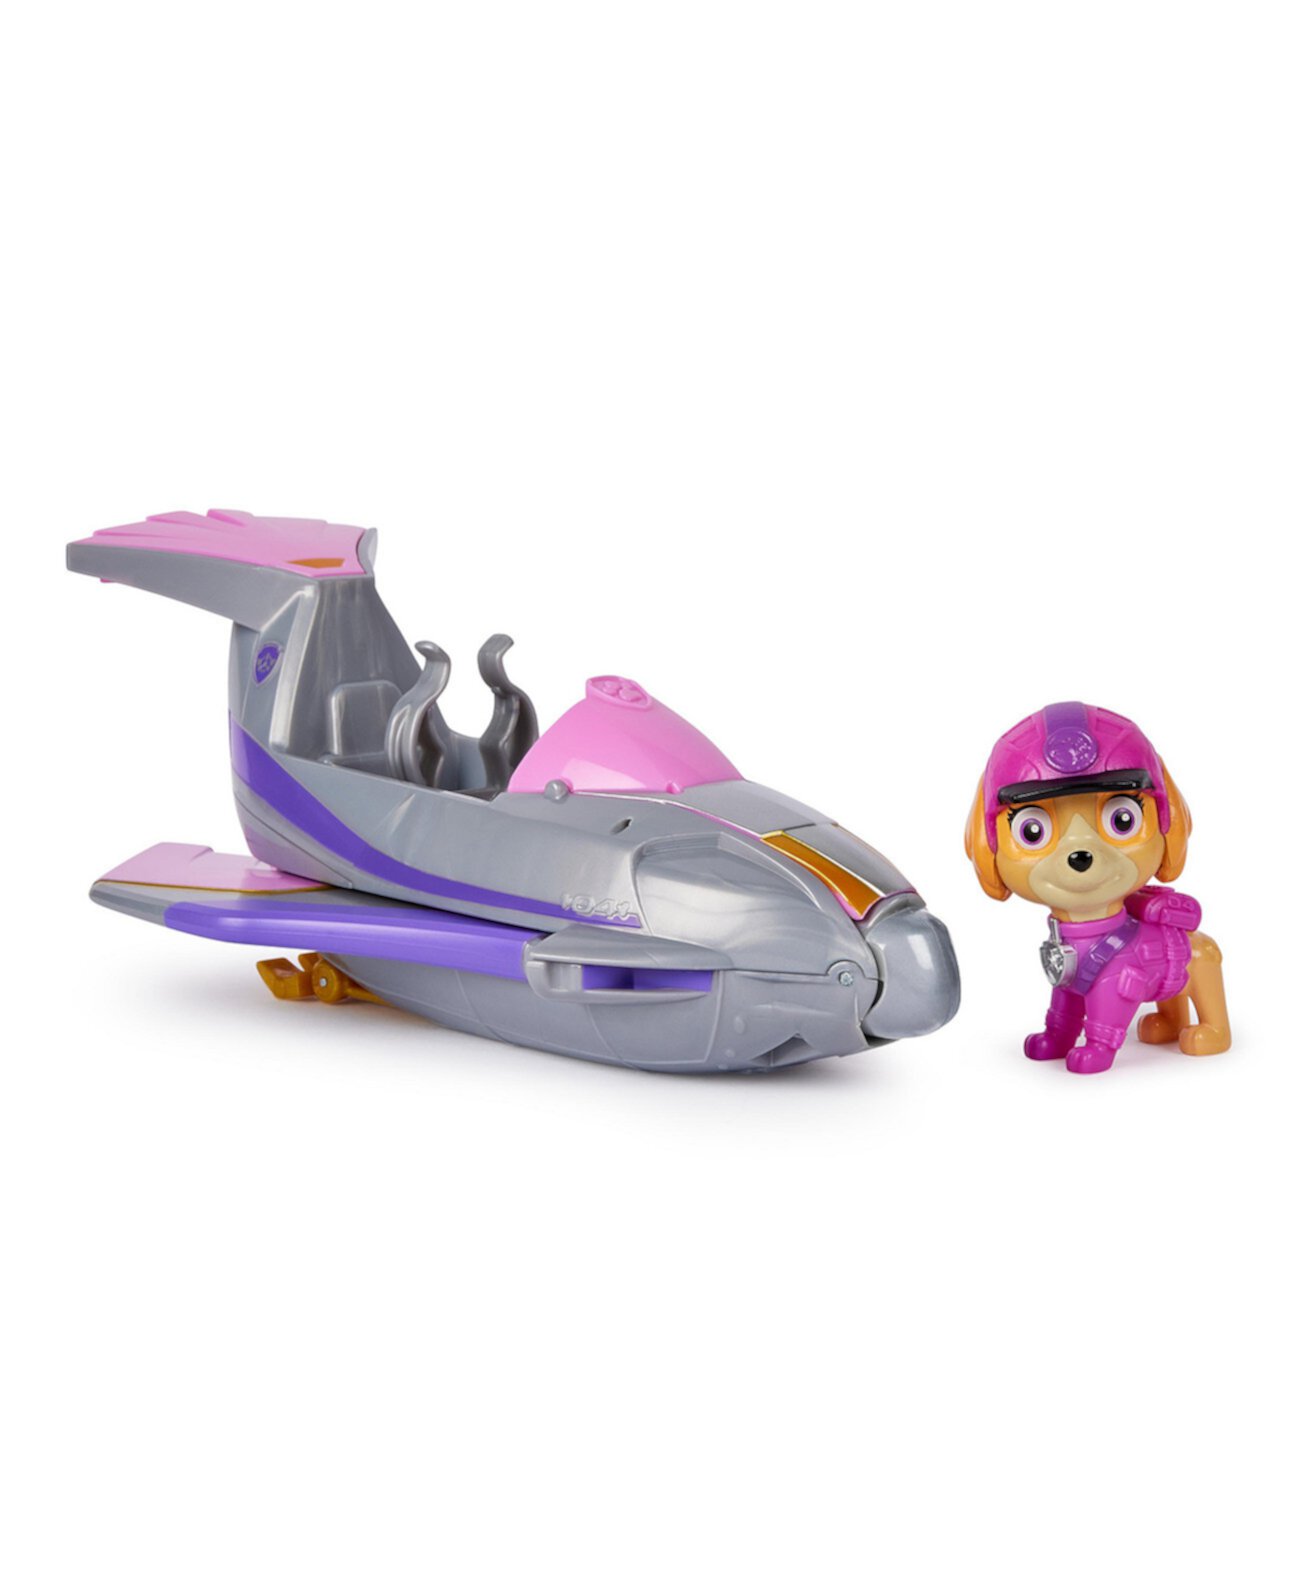 Jungle Pups, Skye Falcon Vehicle, Toy Jet with Collectible Action Figure Paw Patrol